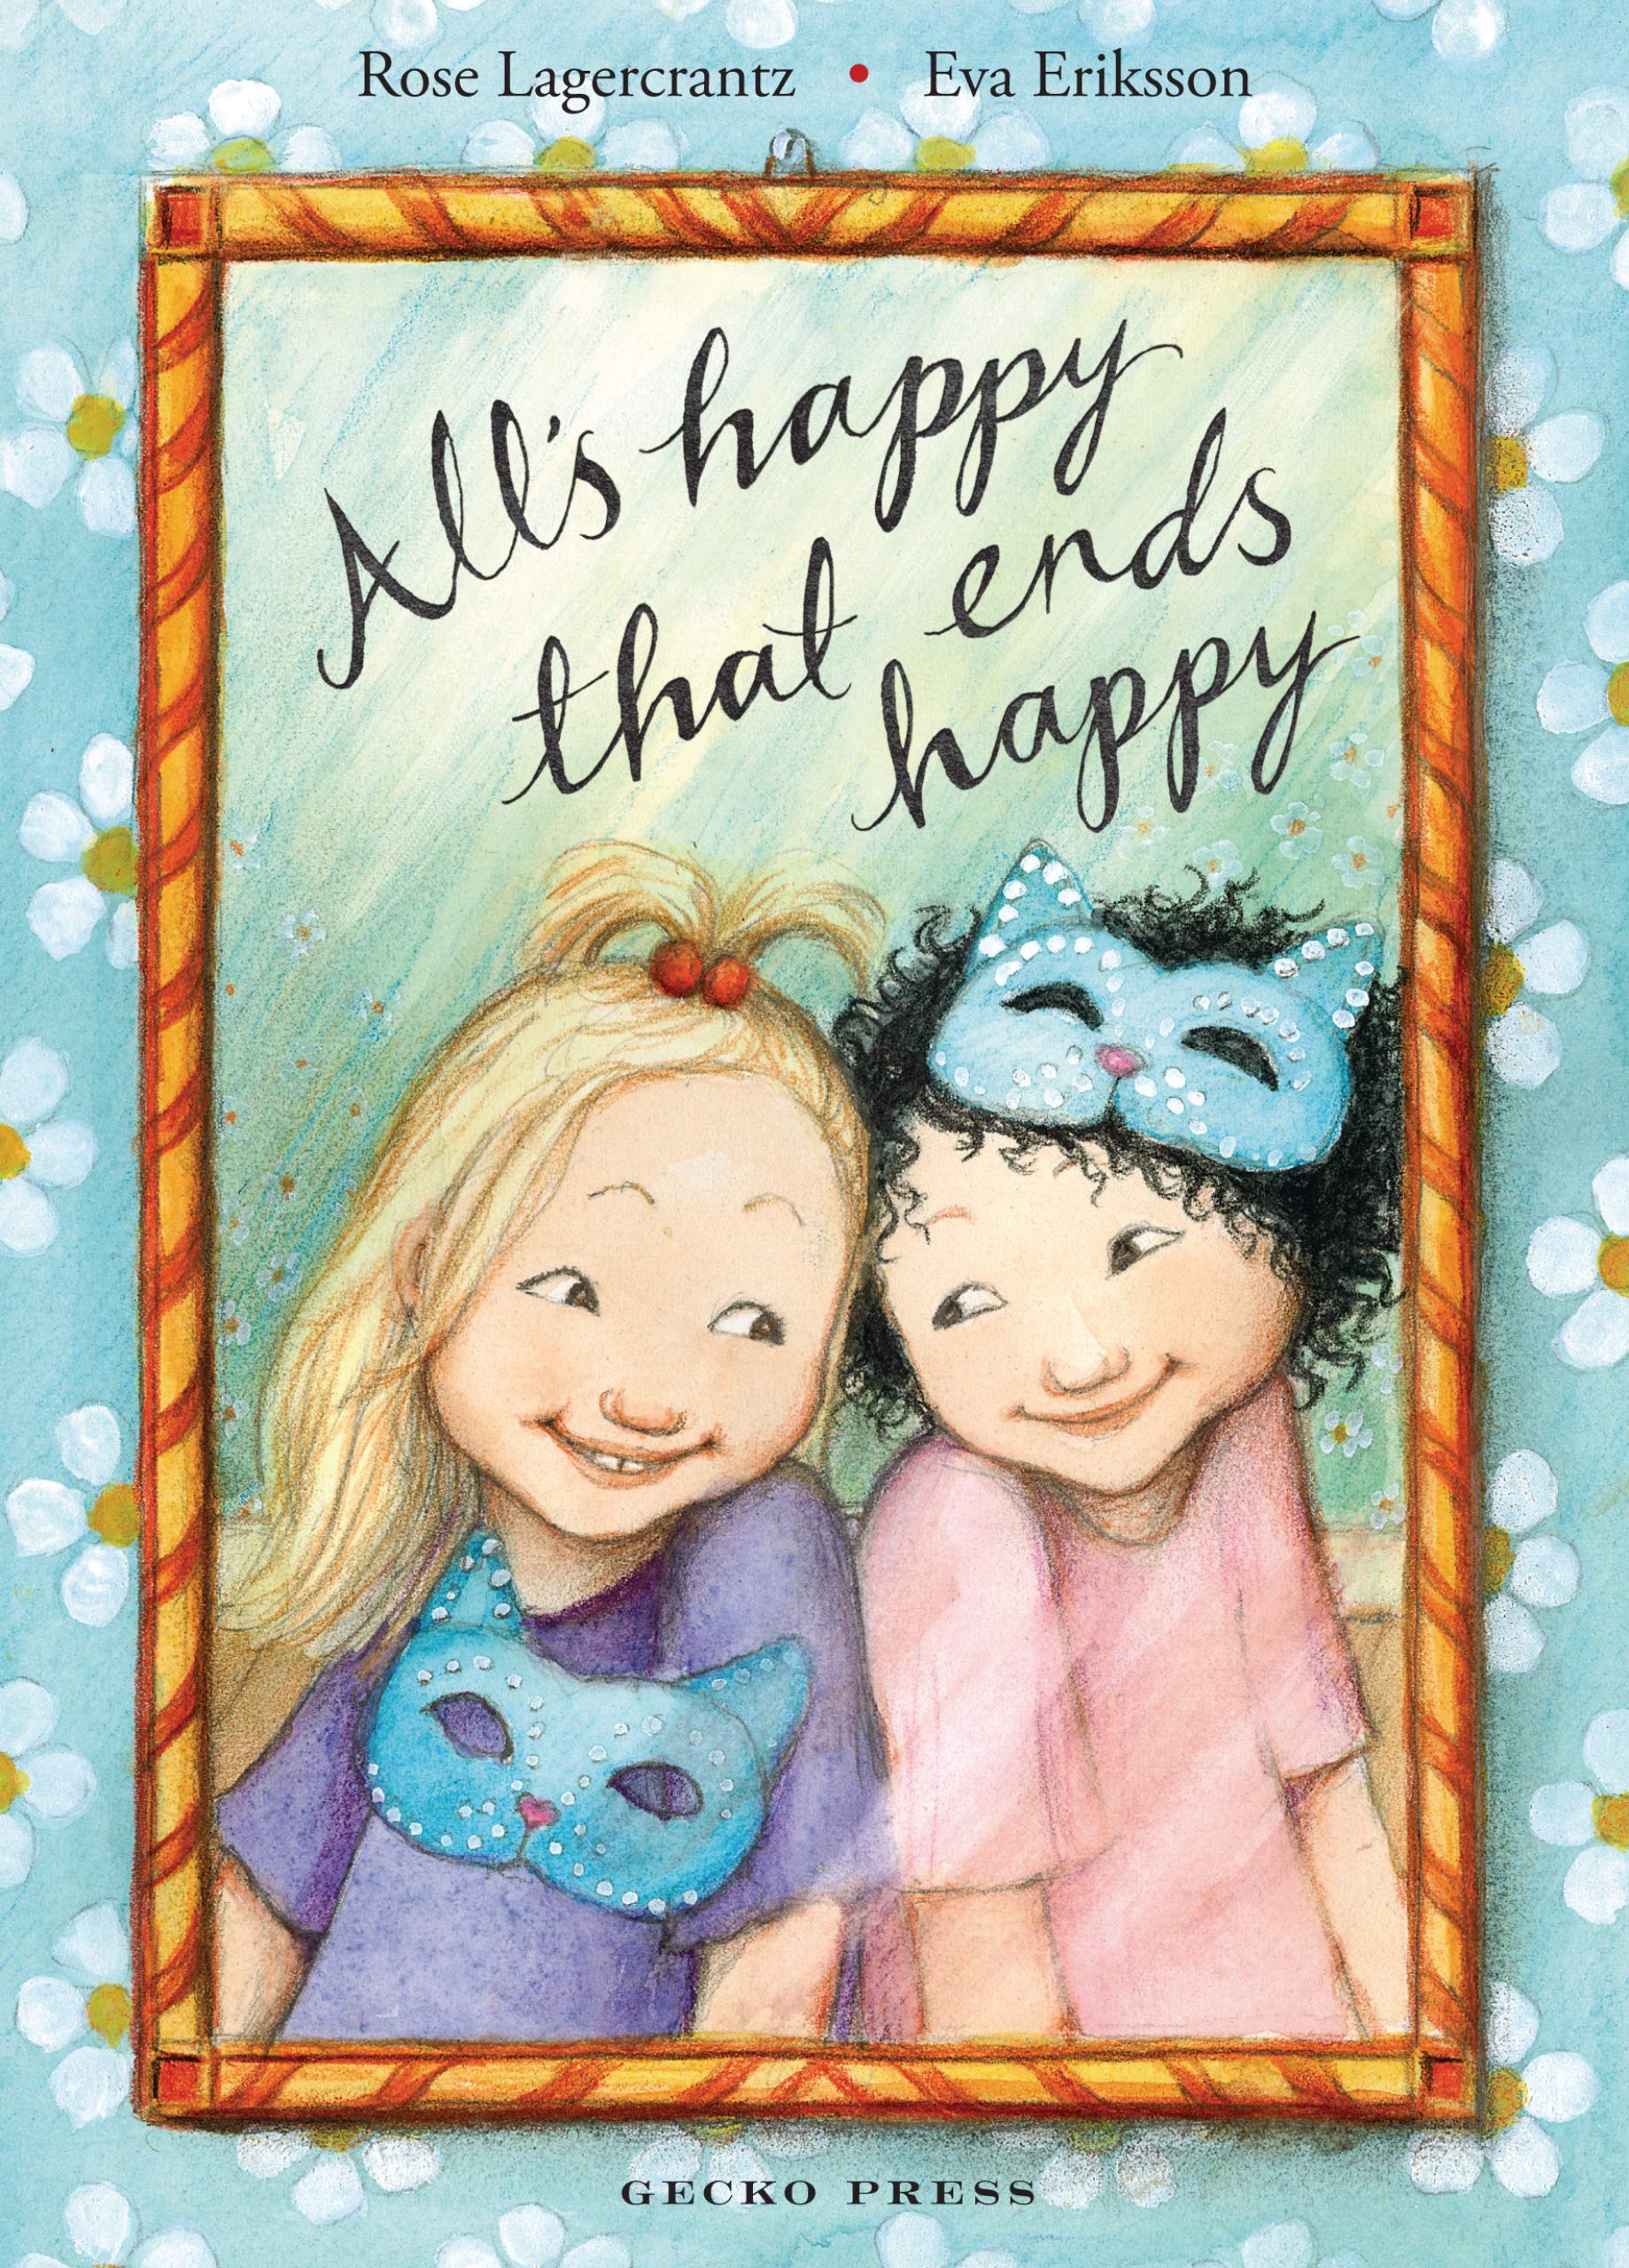 Two young white girls lean against each other, smiling in a framed photo | One girl has her blonde hair in a top knot.  She wears purple shirt and has a blue cat mask around her neck | The other girl has dark curly hair and is wearing a pink shirt.  She has a blue cat mask pushing up her hair.